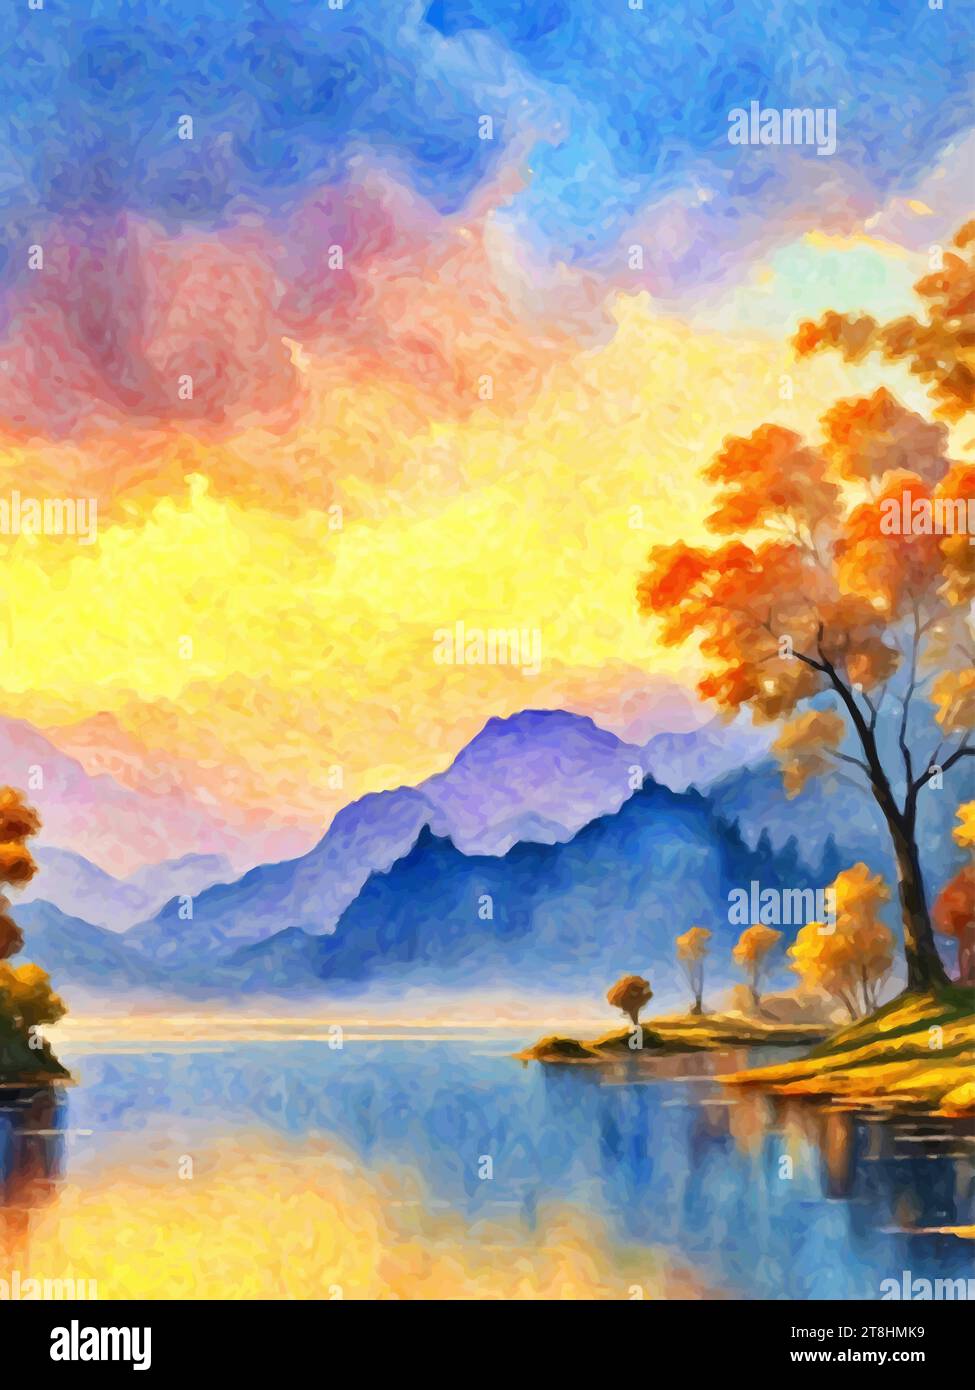 'An artistic masterpiece depicting mountains, rivers, forests, and trees – nature at its finest.' Stock Vector